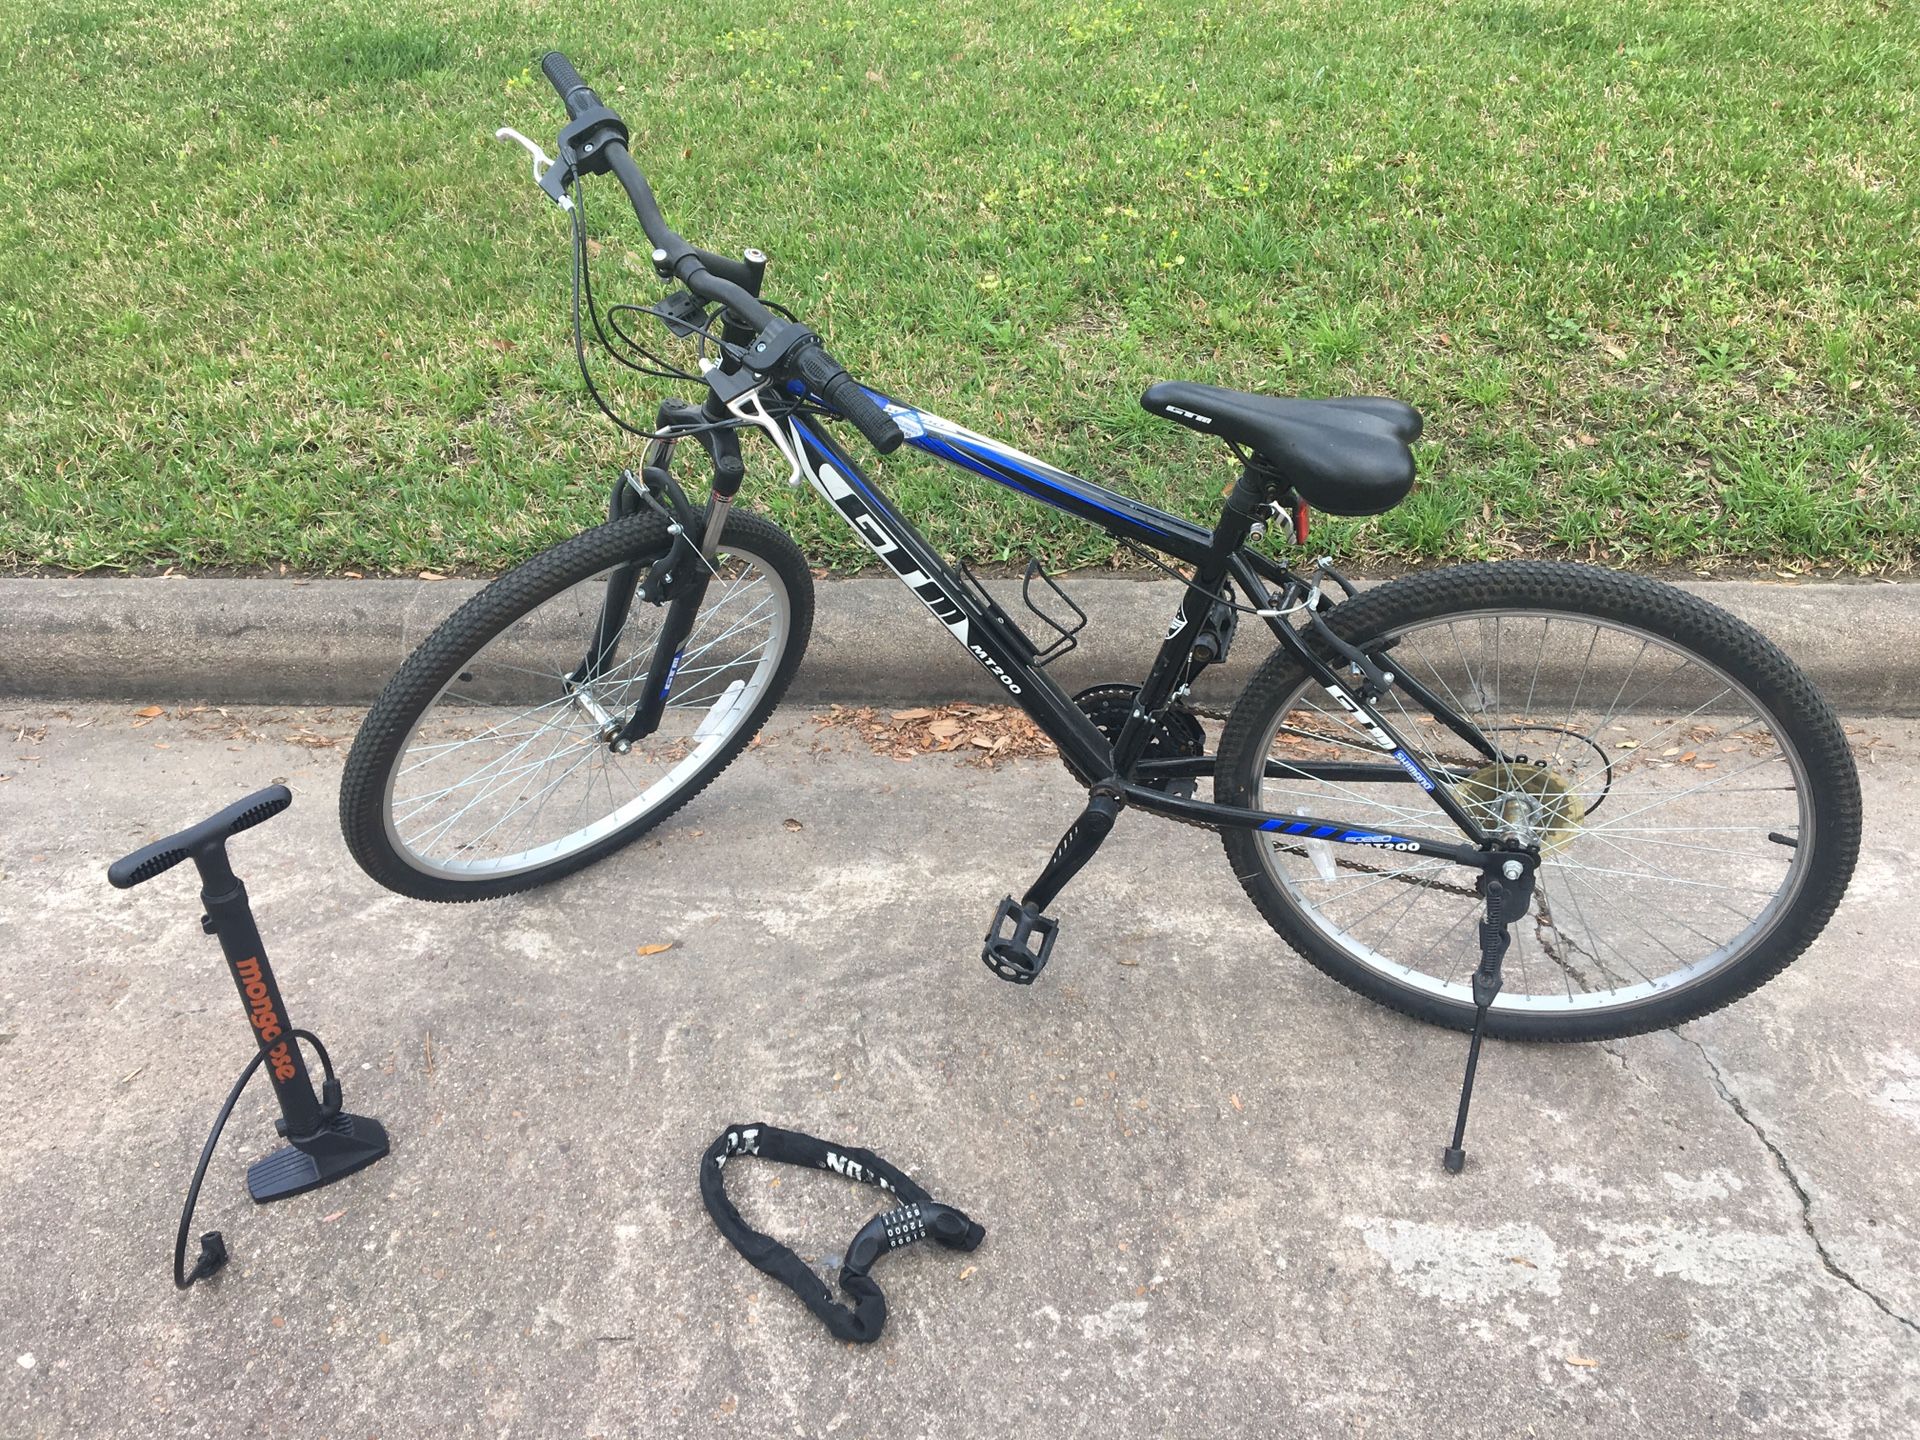 26" GTM Bike with Pump & Lock (price when bought - $145)